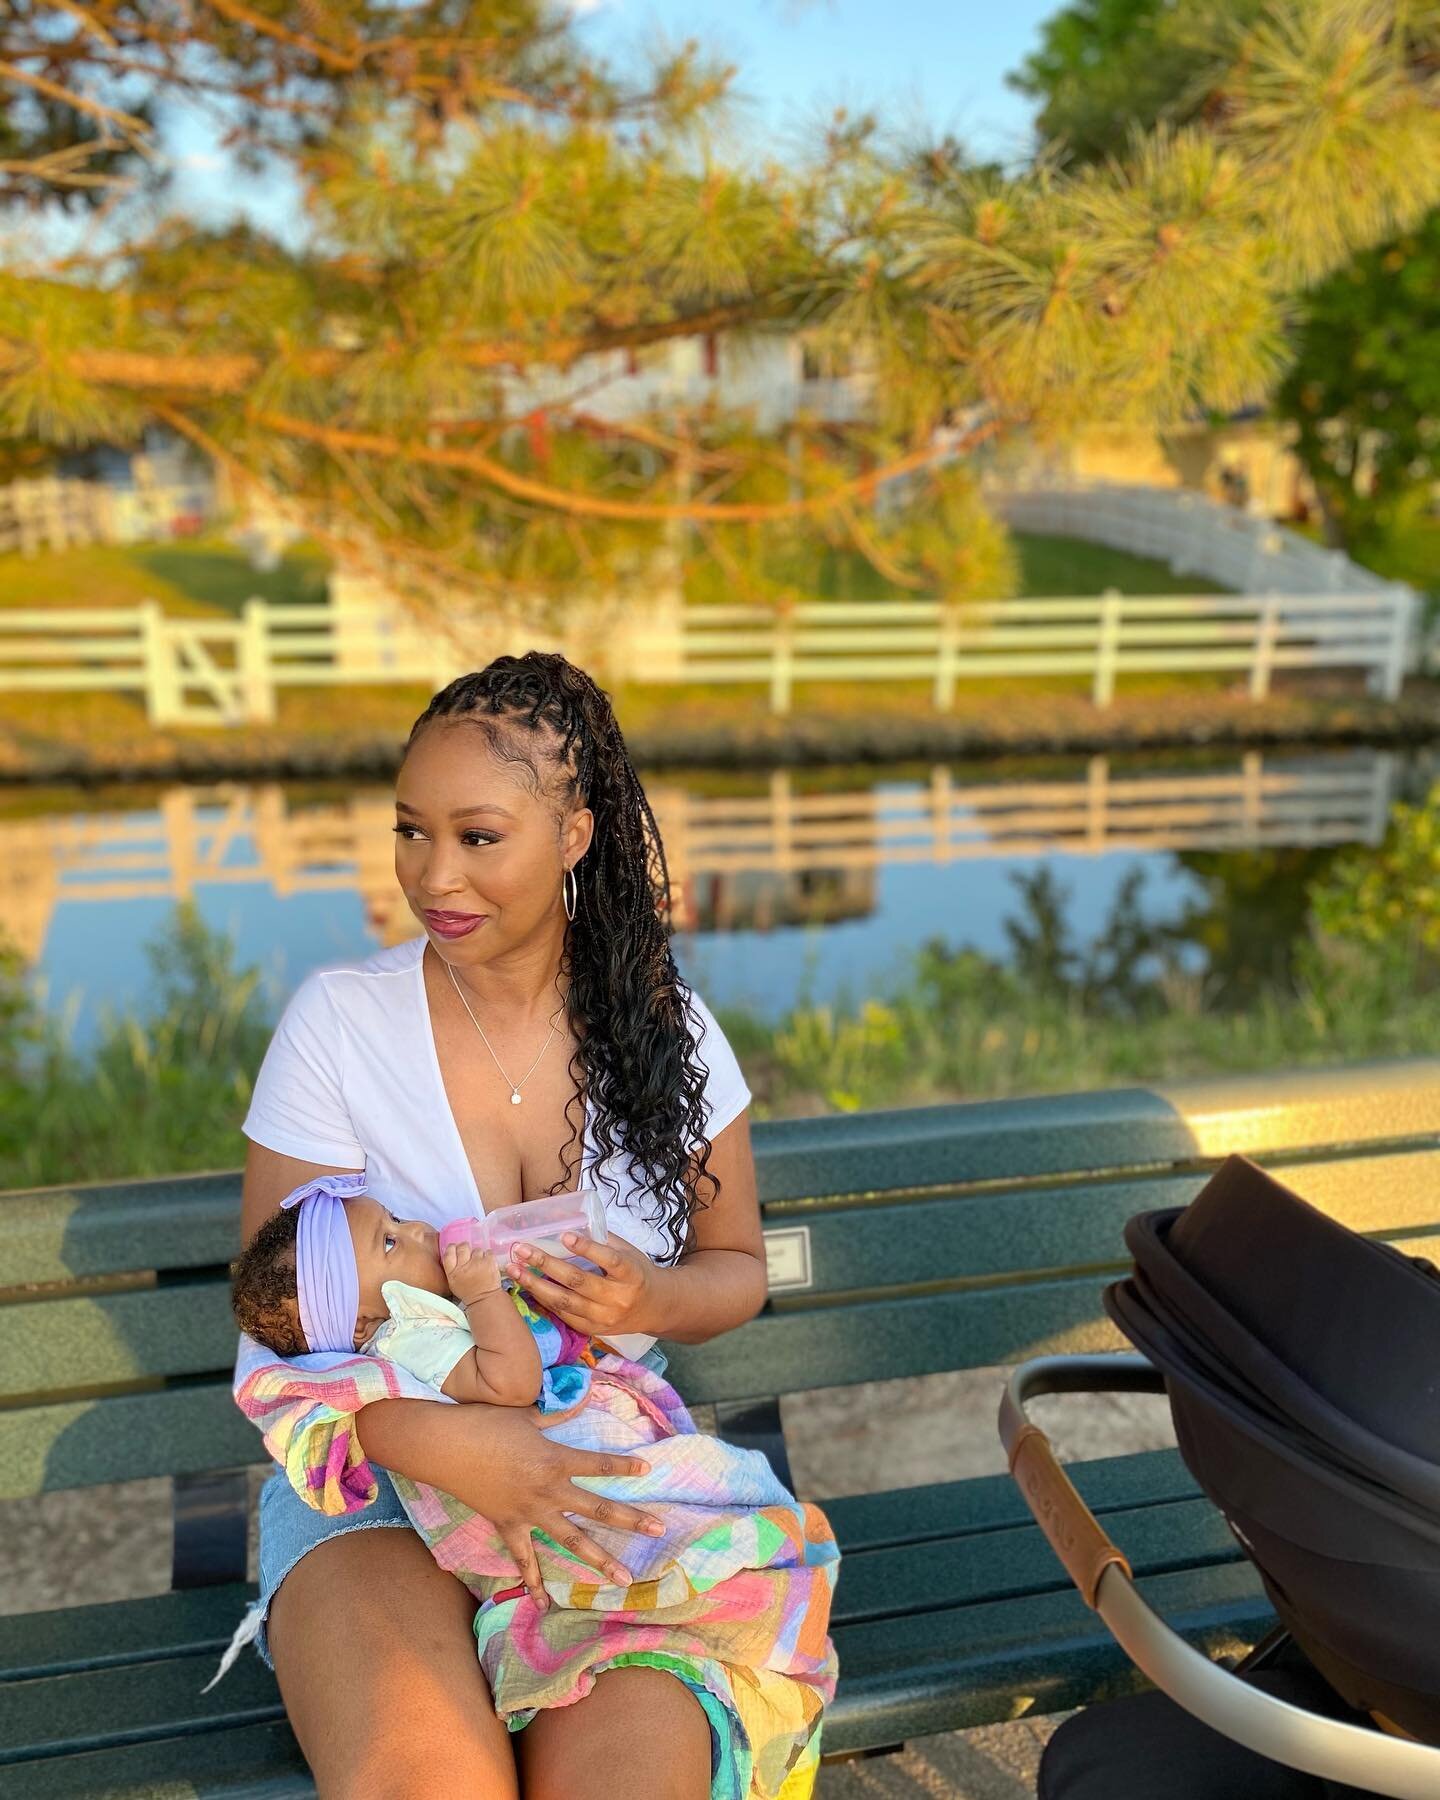 Sunsets and fresh air with my little love 🌅🥰Happy 2 months my sweet baby💕🌳